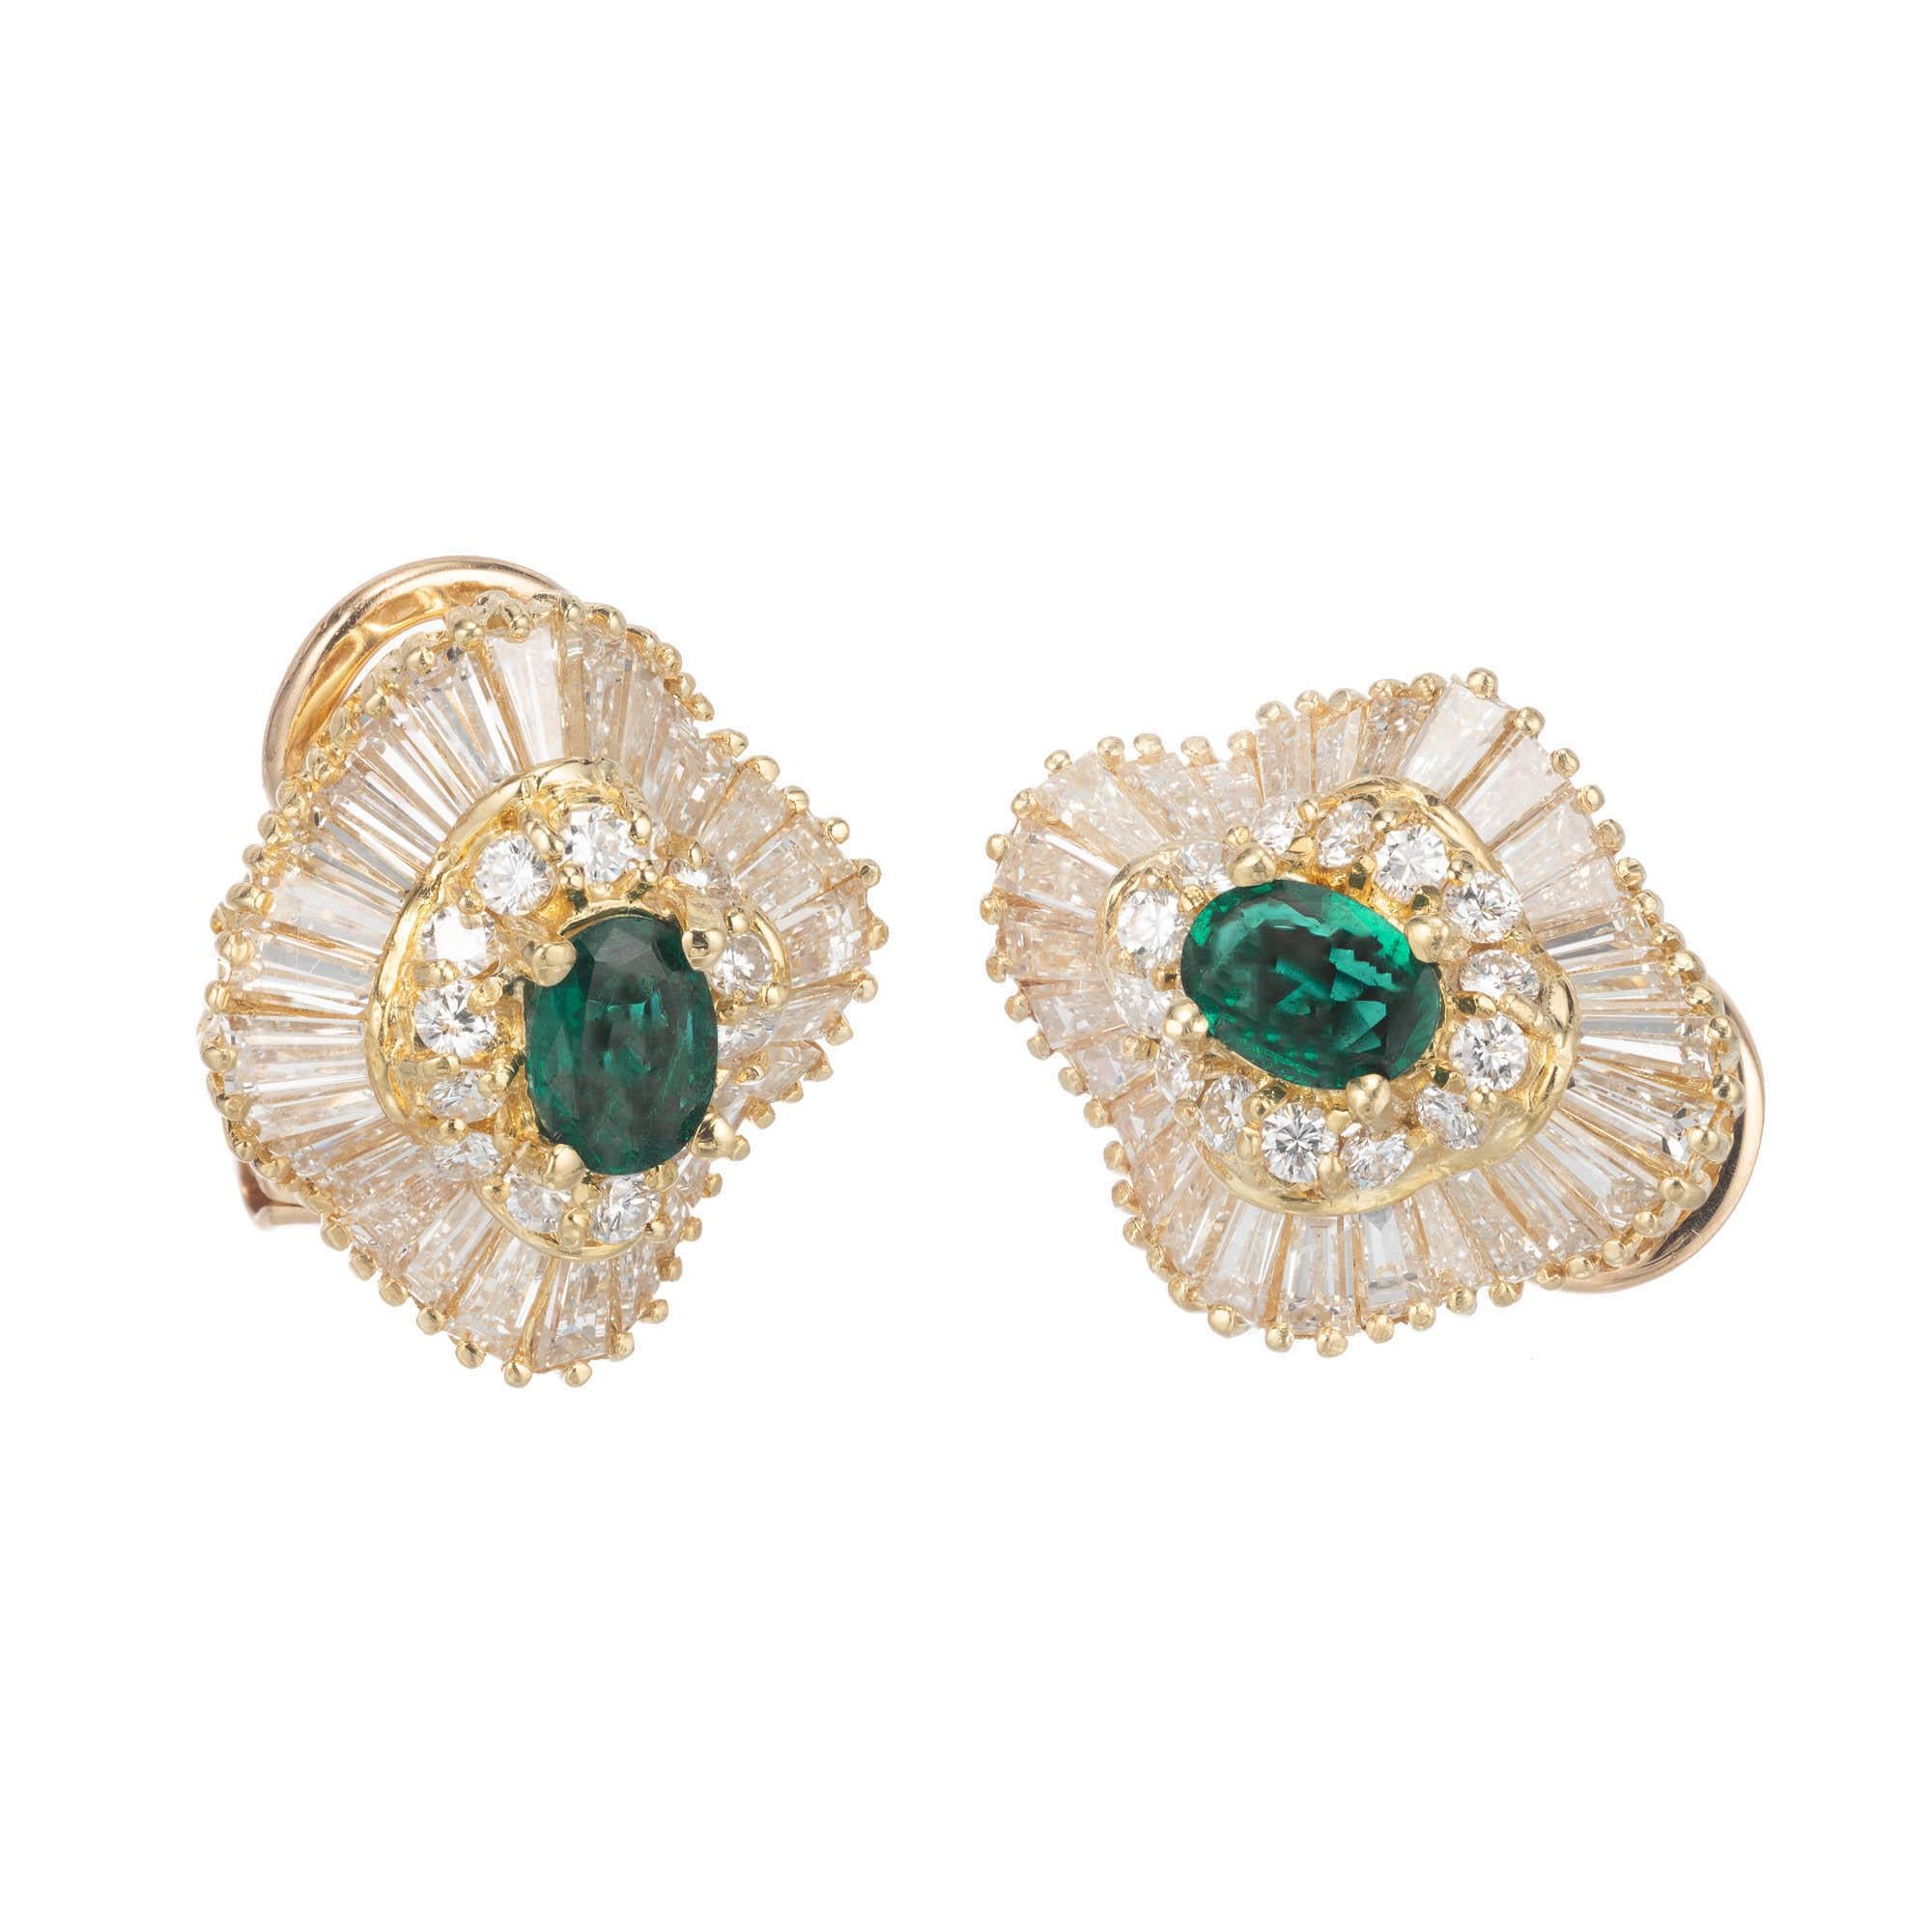 Natural untreated no enhancement emerald and diamond lever back fan style earrings.  GIA certified.  The emeralds are set in a ballerina style round and baguette diamond 18k yellow gold settings. 

2 oval deep green emerald, Approximate .60 carats.